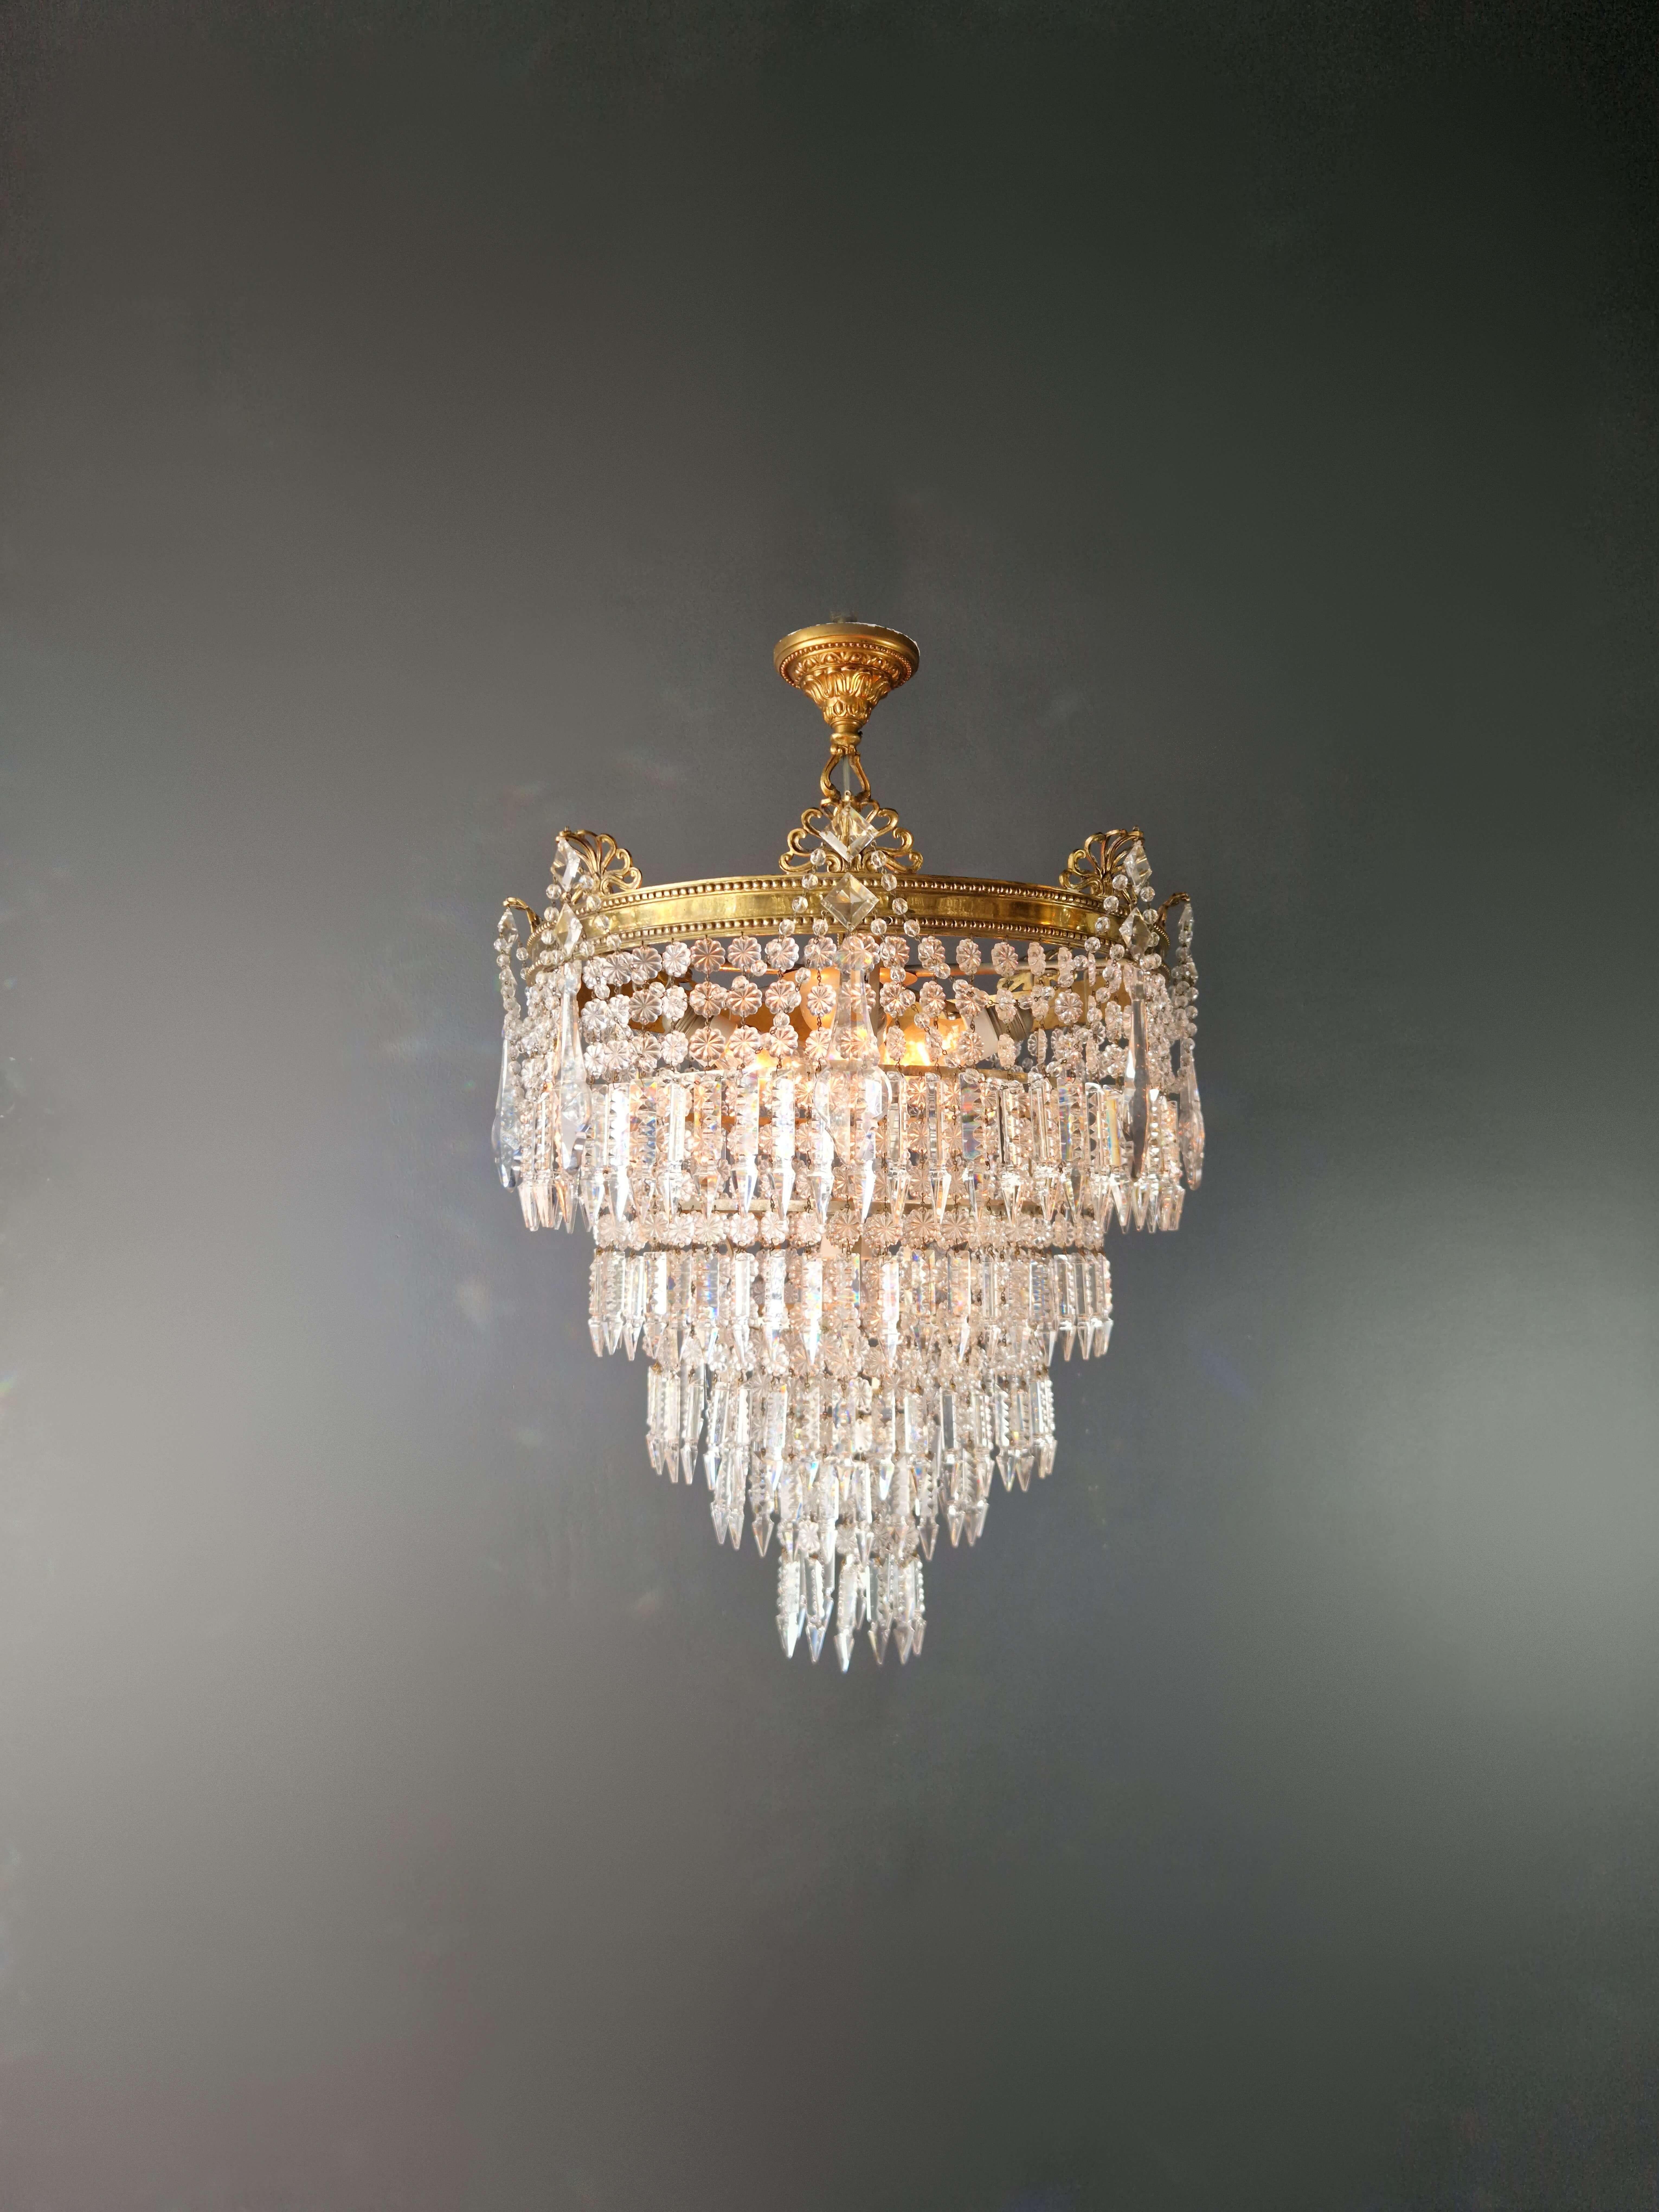 Elegant antique chandelier: a testament to craftsmanship and grace

Experience the revived splendor of the past in our meticulously restored vintage chandelier, a true masterpiece that embodies the pinnacle of Art Deco design. With the greatest care